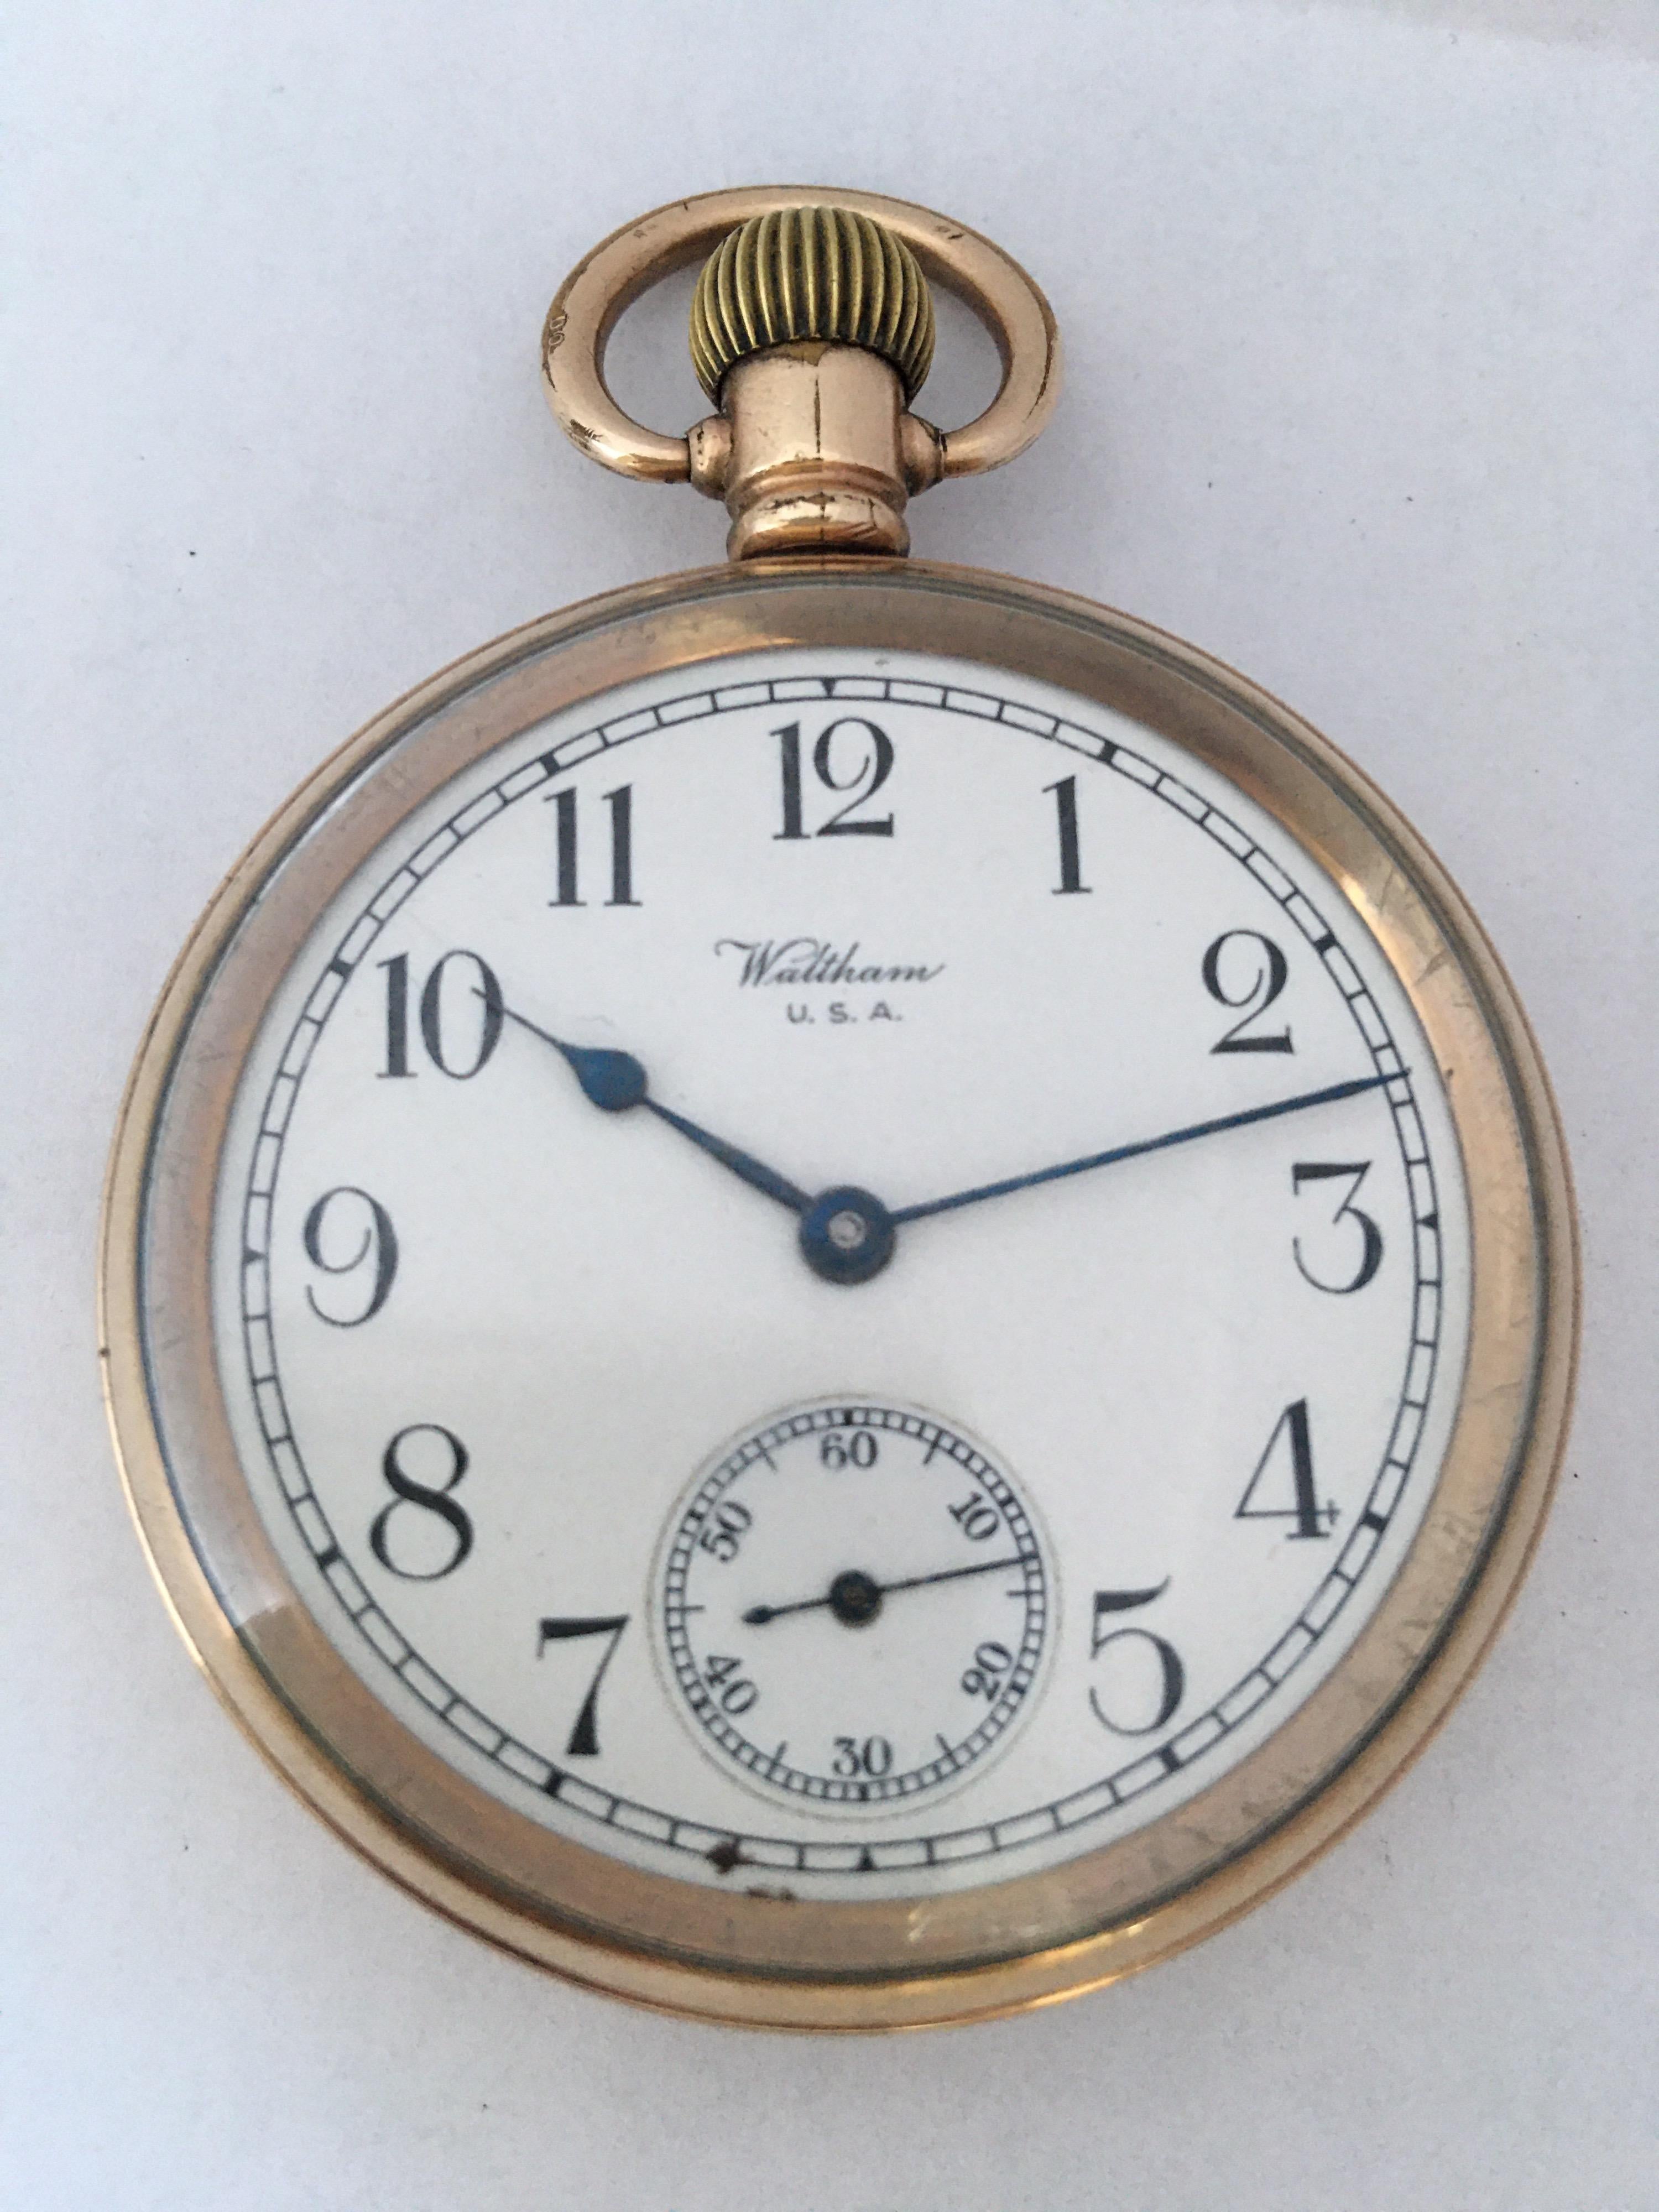 Antique Gold-Plated Dennison Case Waltham U.S.A Hand-Winding Pocket Watch For Sale 5